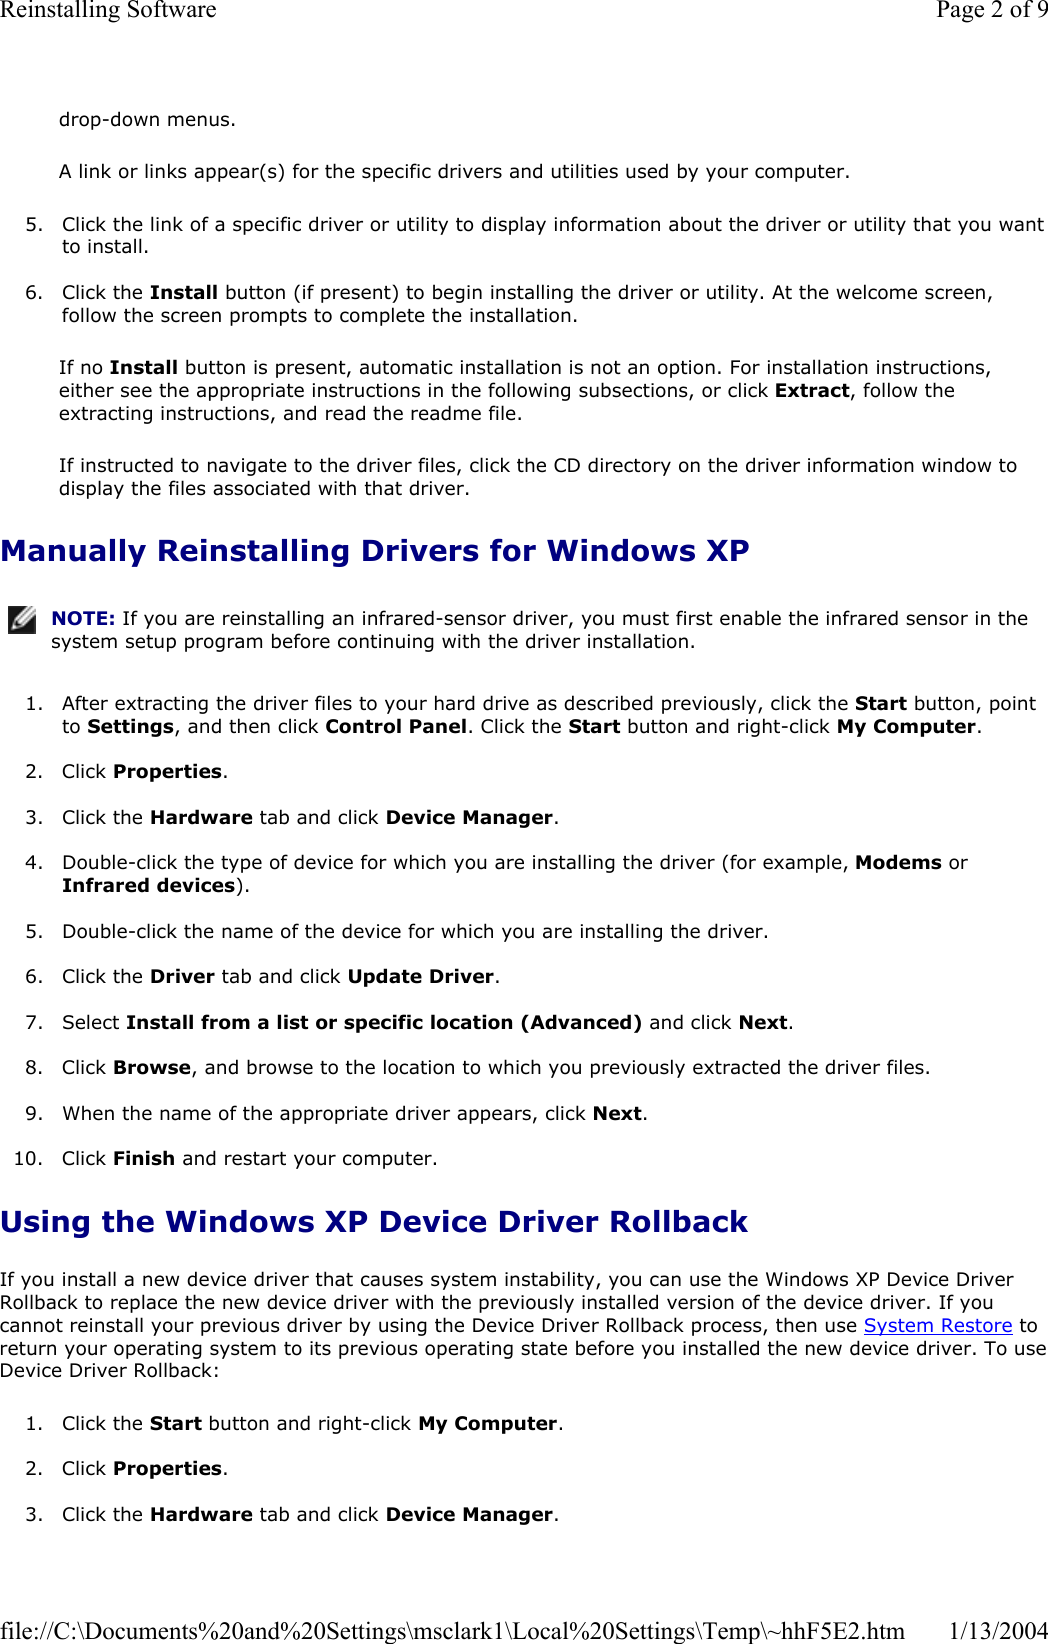 drop-down menus. A link or links appear(s) for the specific drivers and utilities used by your computer. 5. Click the link of a specific driver or utility to display information about the driver or utility that you want to install. 6. Click the Install button (if present) to begin installing the driver or utility. At the welcome screen, follow the screen prompts to complete the installation. If no Install button is present, automatic installation is not an option. For installation instructions, either see the appropriate instructions in the following subsections, or click Extract, follow the extracting instructions, and read the readme file. If instructed to navigate to the driver files, click the CD directory on the driver information window to display the files associated with that driver. Manually Reinstalling Drivers for Windows XP1. After extracting the driver files to your hard drive as described previously, click the Start button, point to Settings, and then click Control Panel. Click the Start button and right-click My Computer.2. Click Properties.3. Click the Hardware tab and click Device Manager.4. Double-click the type of device for which you are installing the driver (for example, Modems or Infrared devices).5. Double-click the name of the device for which you are installing the driver. 6. Click the Driver tab and click Update Driver.7. Select Install from a list or specific location (Advanced) and click Next.8. Click Browse, and browse to the location to which you previously extracted the driver files. 9. When the name of the appropriate driver appears, click Next.10. Click Finish and restart your computer. Using the Windows XP Device Driver Rollback If you install a new device driver that causes system instability, you can use the Windows XP Device Driver Rollback to replace the new device driver with the previously installed version of the device driver. If you cannot reinstall your previous driver by using the Device Driver Rollback process, then use System Restore to return your operating system to its previous operating state before you installed the new device driver. To useDevice Driver Rollback: 1. Click the Start button and right-click My Computer.2. Click Properties.3. Click the Hardware tab and click Device Manager.NOTE: If you are reinstalling an infrared-sensor driver, you must first enable the infrared sensor in the system setup program before continuing with the driver installation.Page 2 of 9Reinstalling Software1/13/2004file://C:\Documents%20and%20Settings\msclark1\Local%20Settings\Temp\~hhF5E2.htm